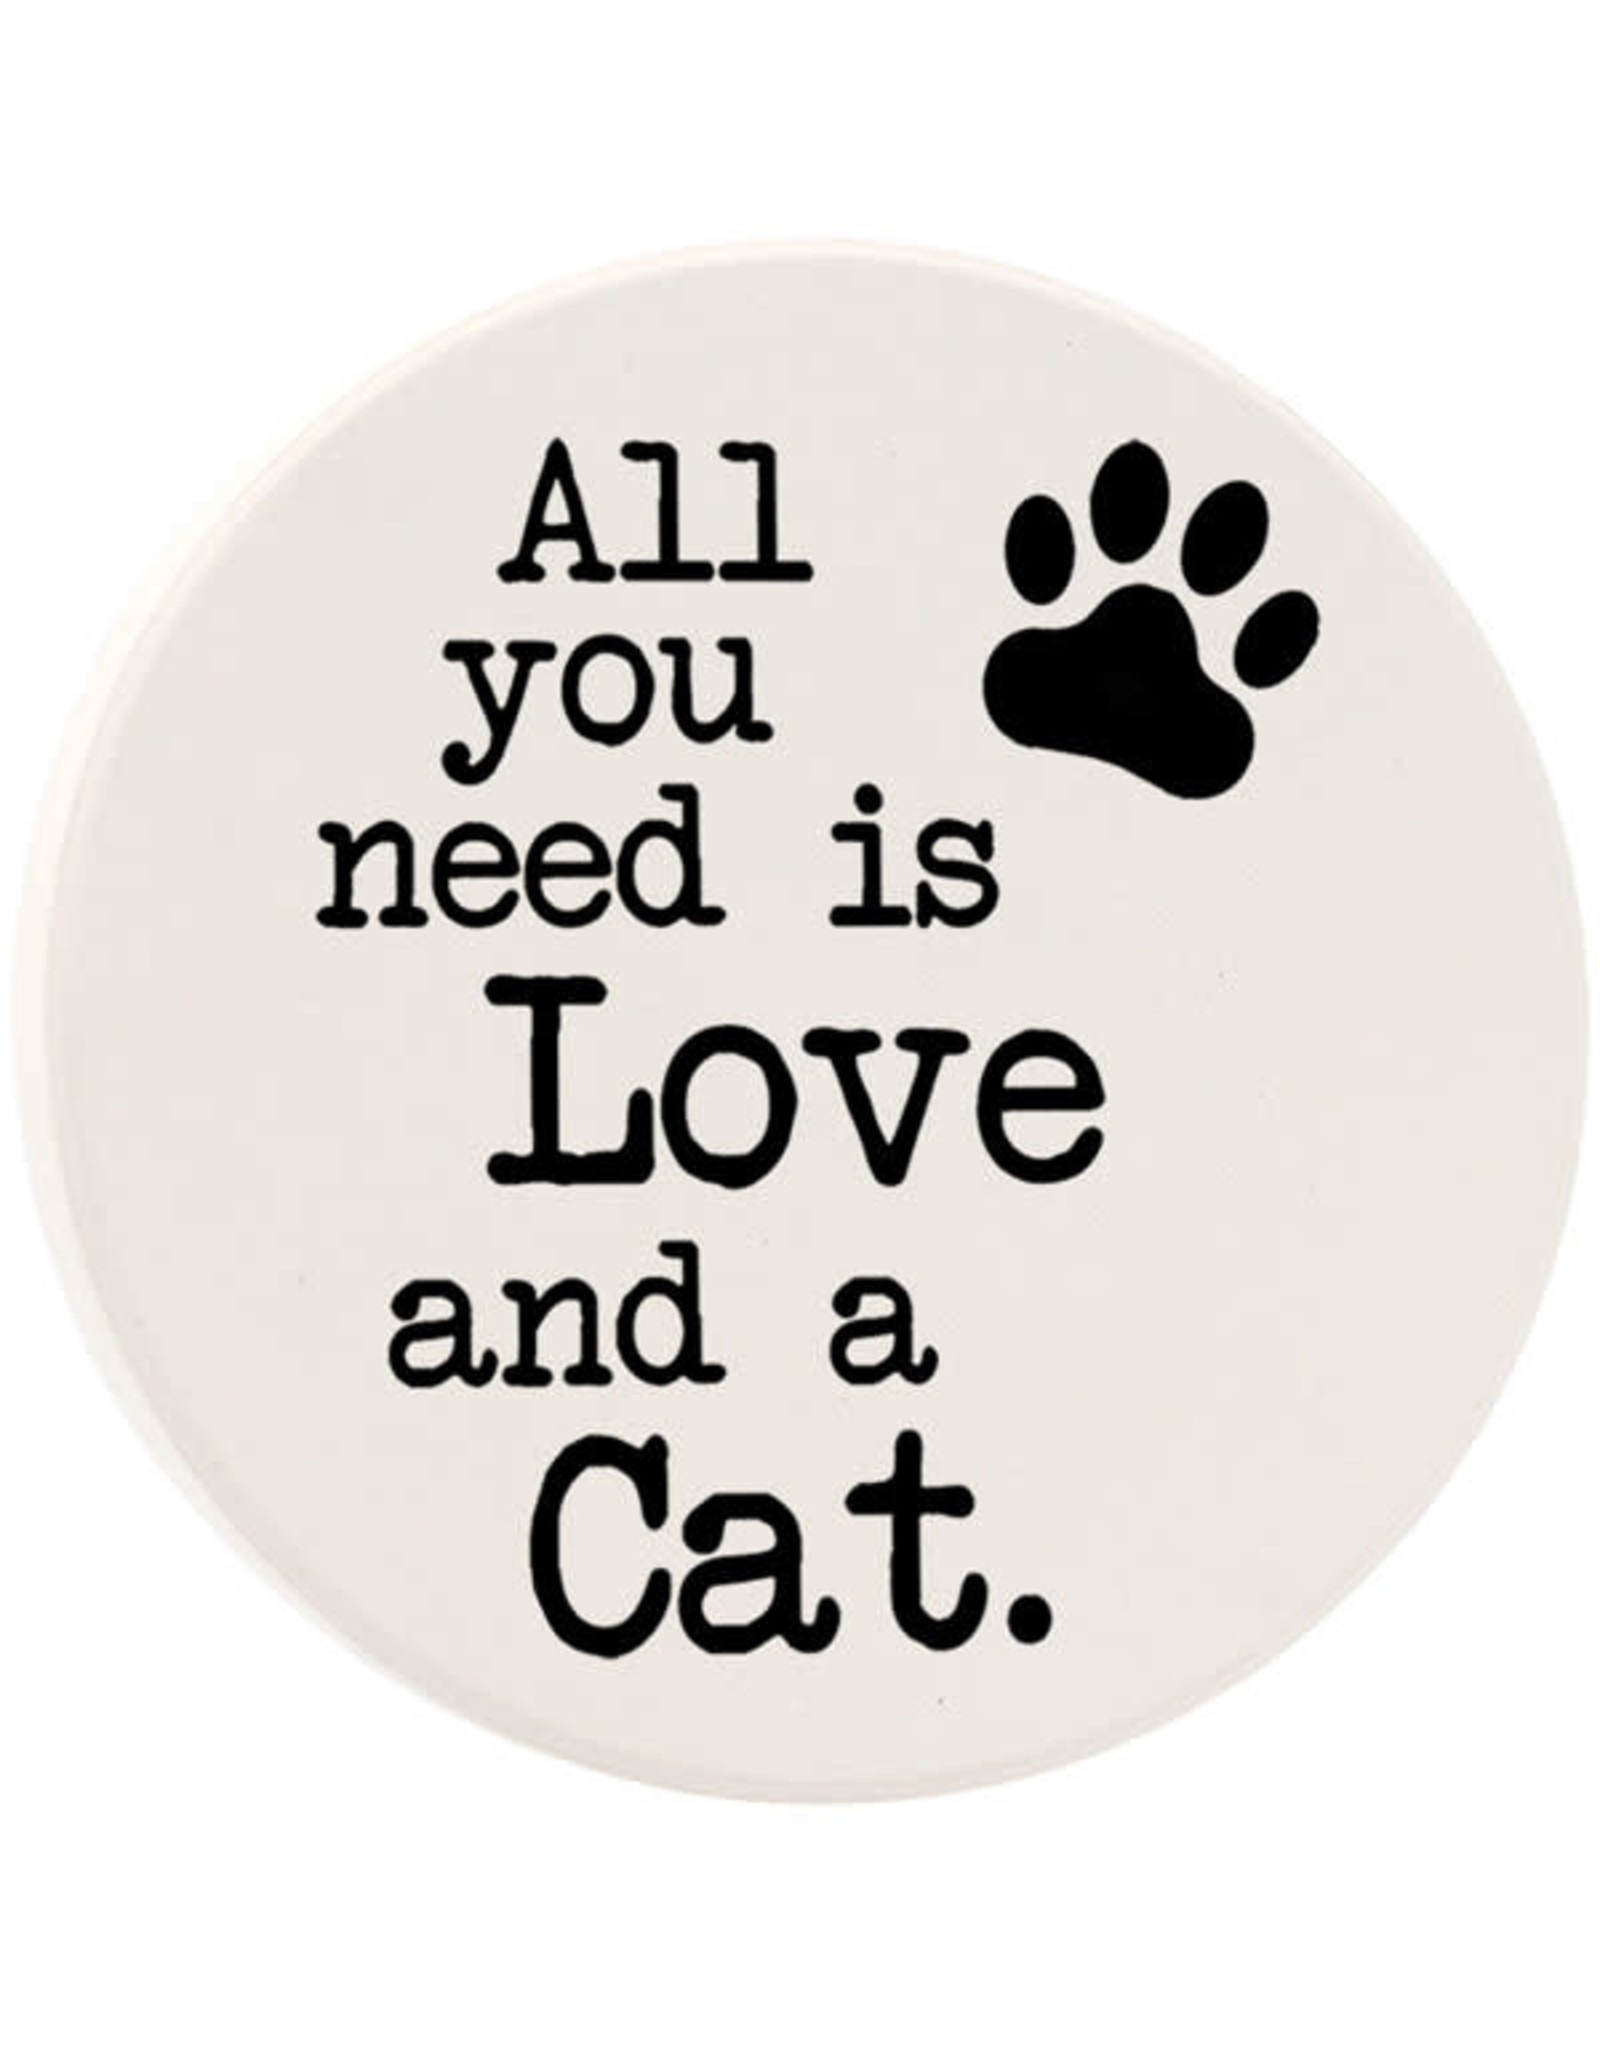 Tipsy Coasters & Gifts All you need is love and a Cat Car Coaster